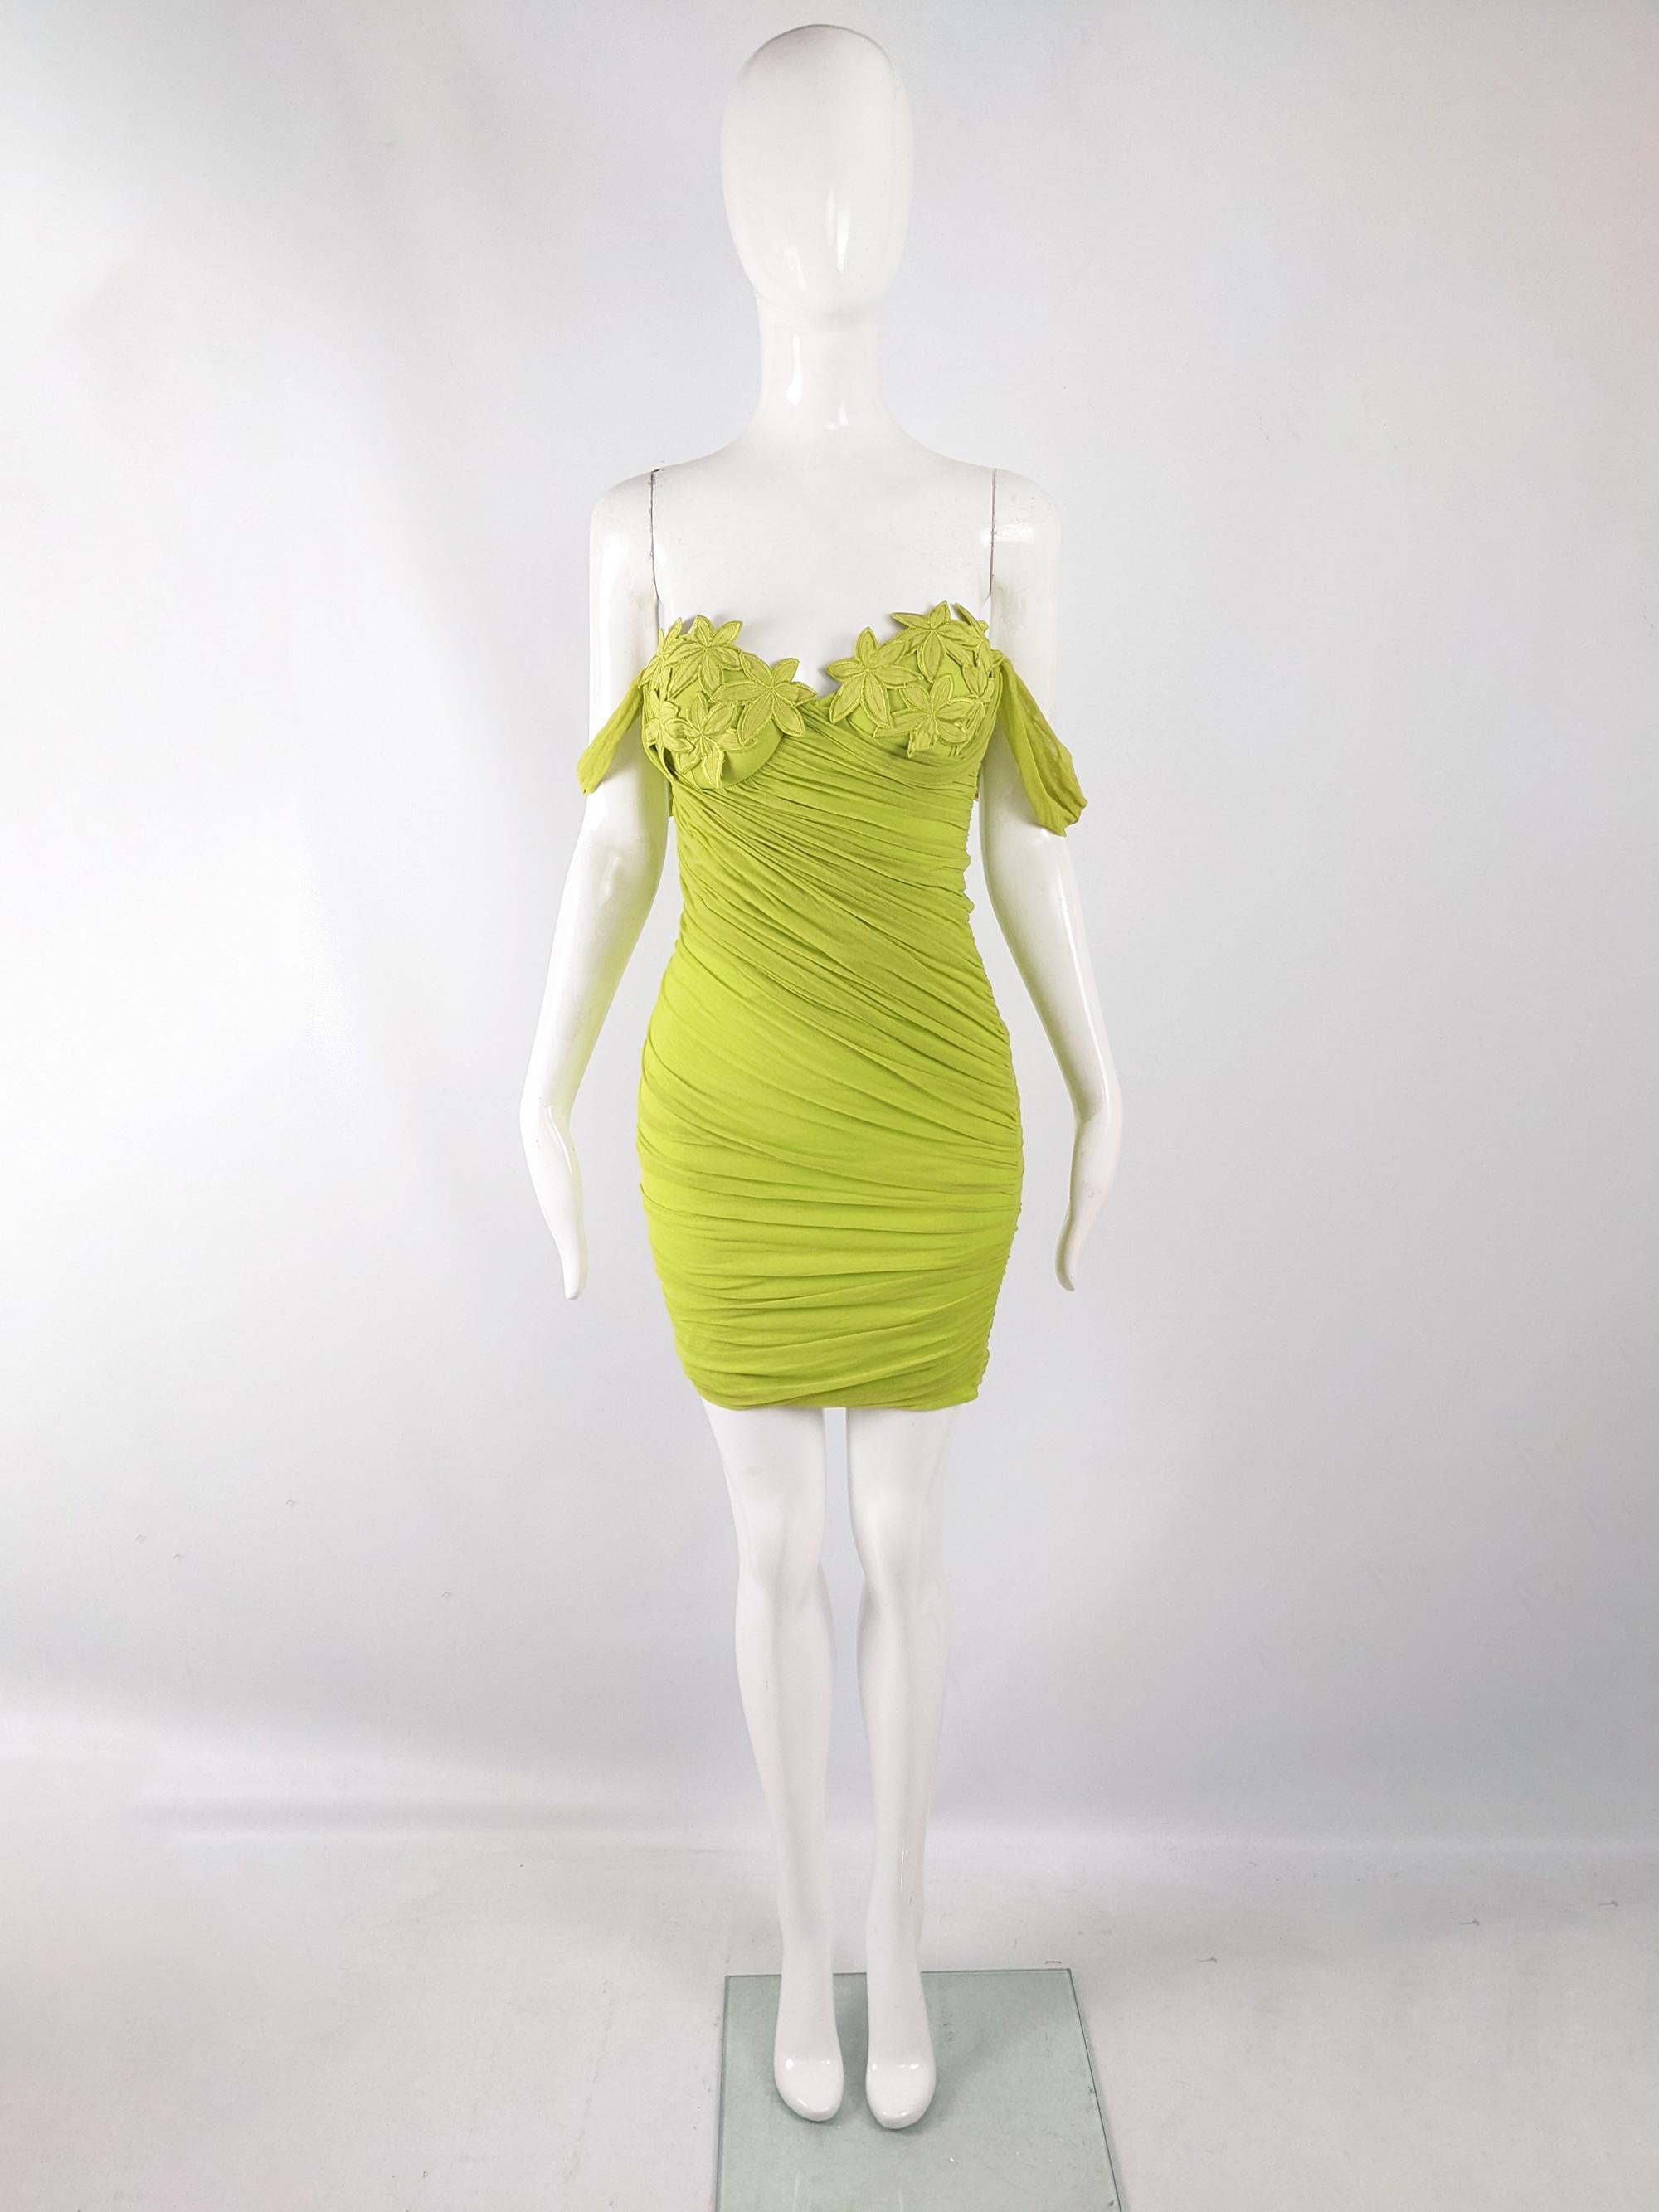 An incredible and sexy vintage womens party dress from the late 80s / early 90s by luxury Italian fashion house, La Perla for their Ritmo di Perla line. In a lime/ acid green stretch mesh over a clingy, body conscious jersey. It has ruching at the